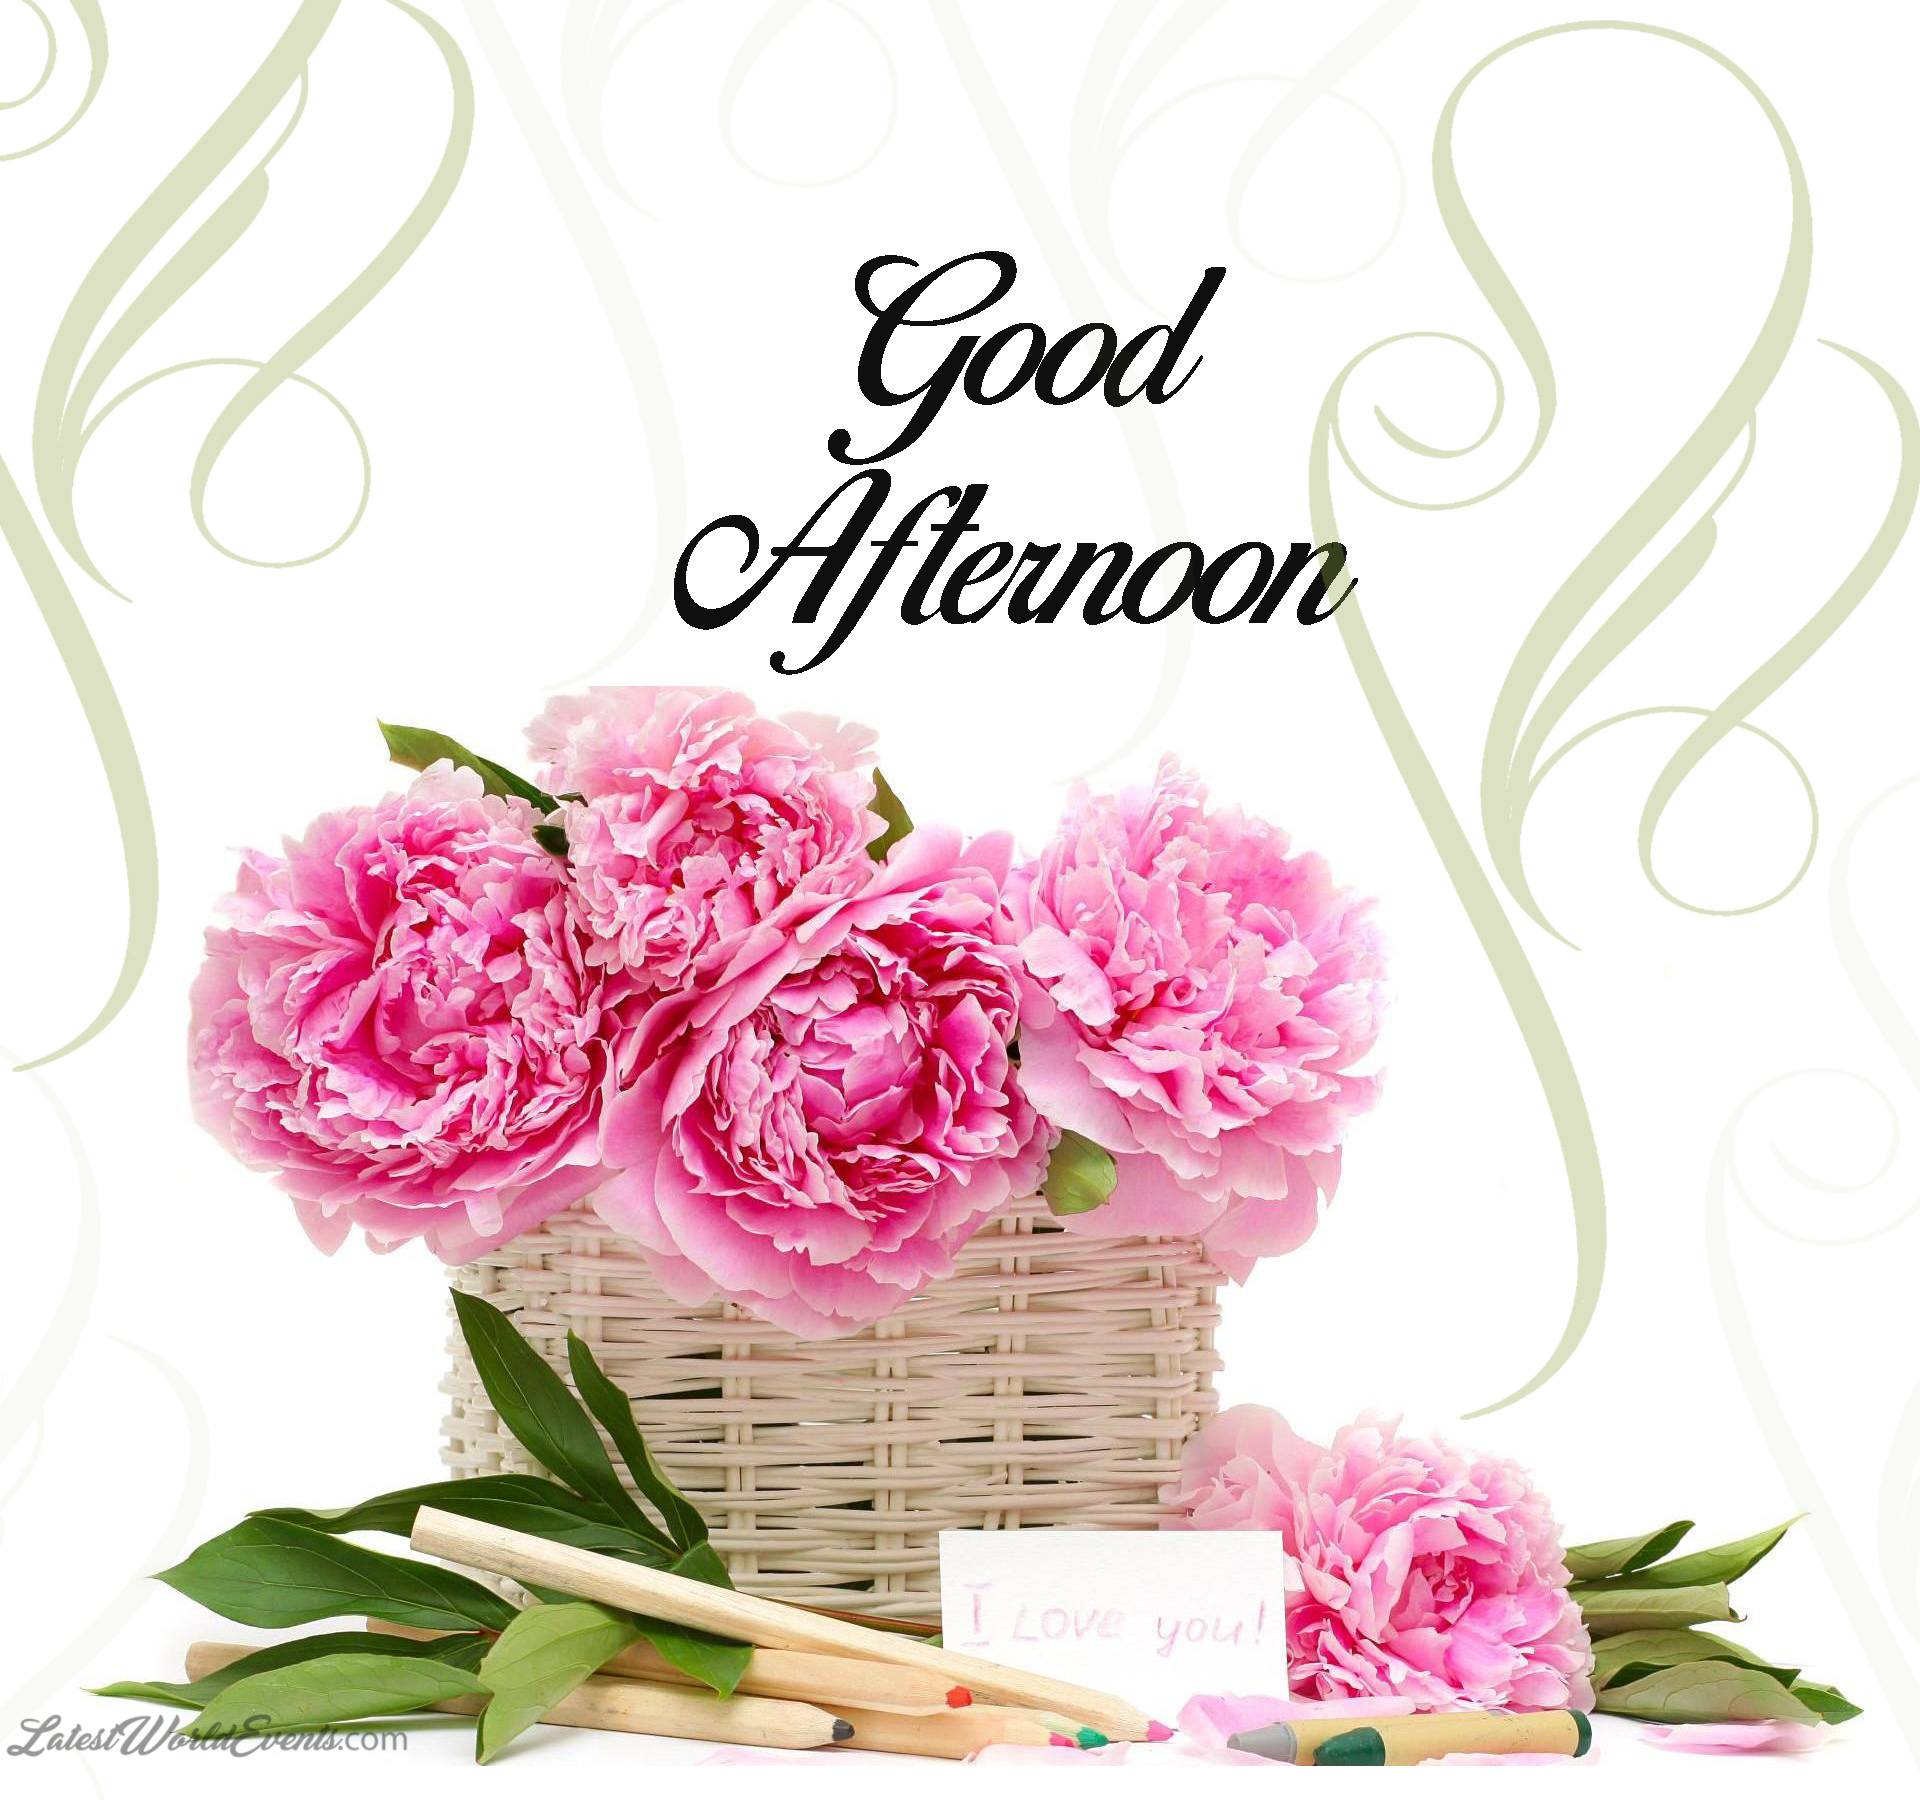 good-afternoon-wish-cards-images